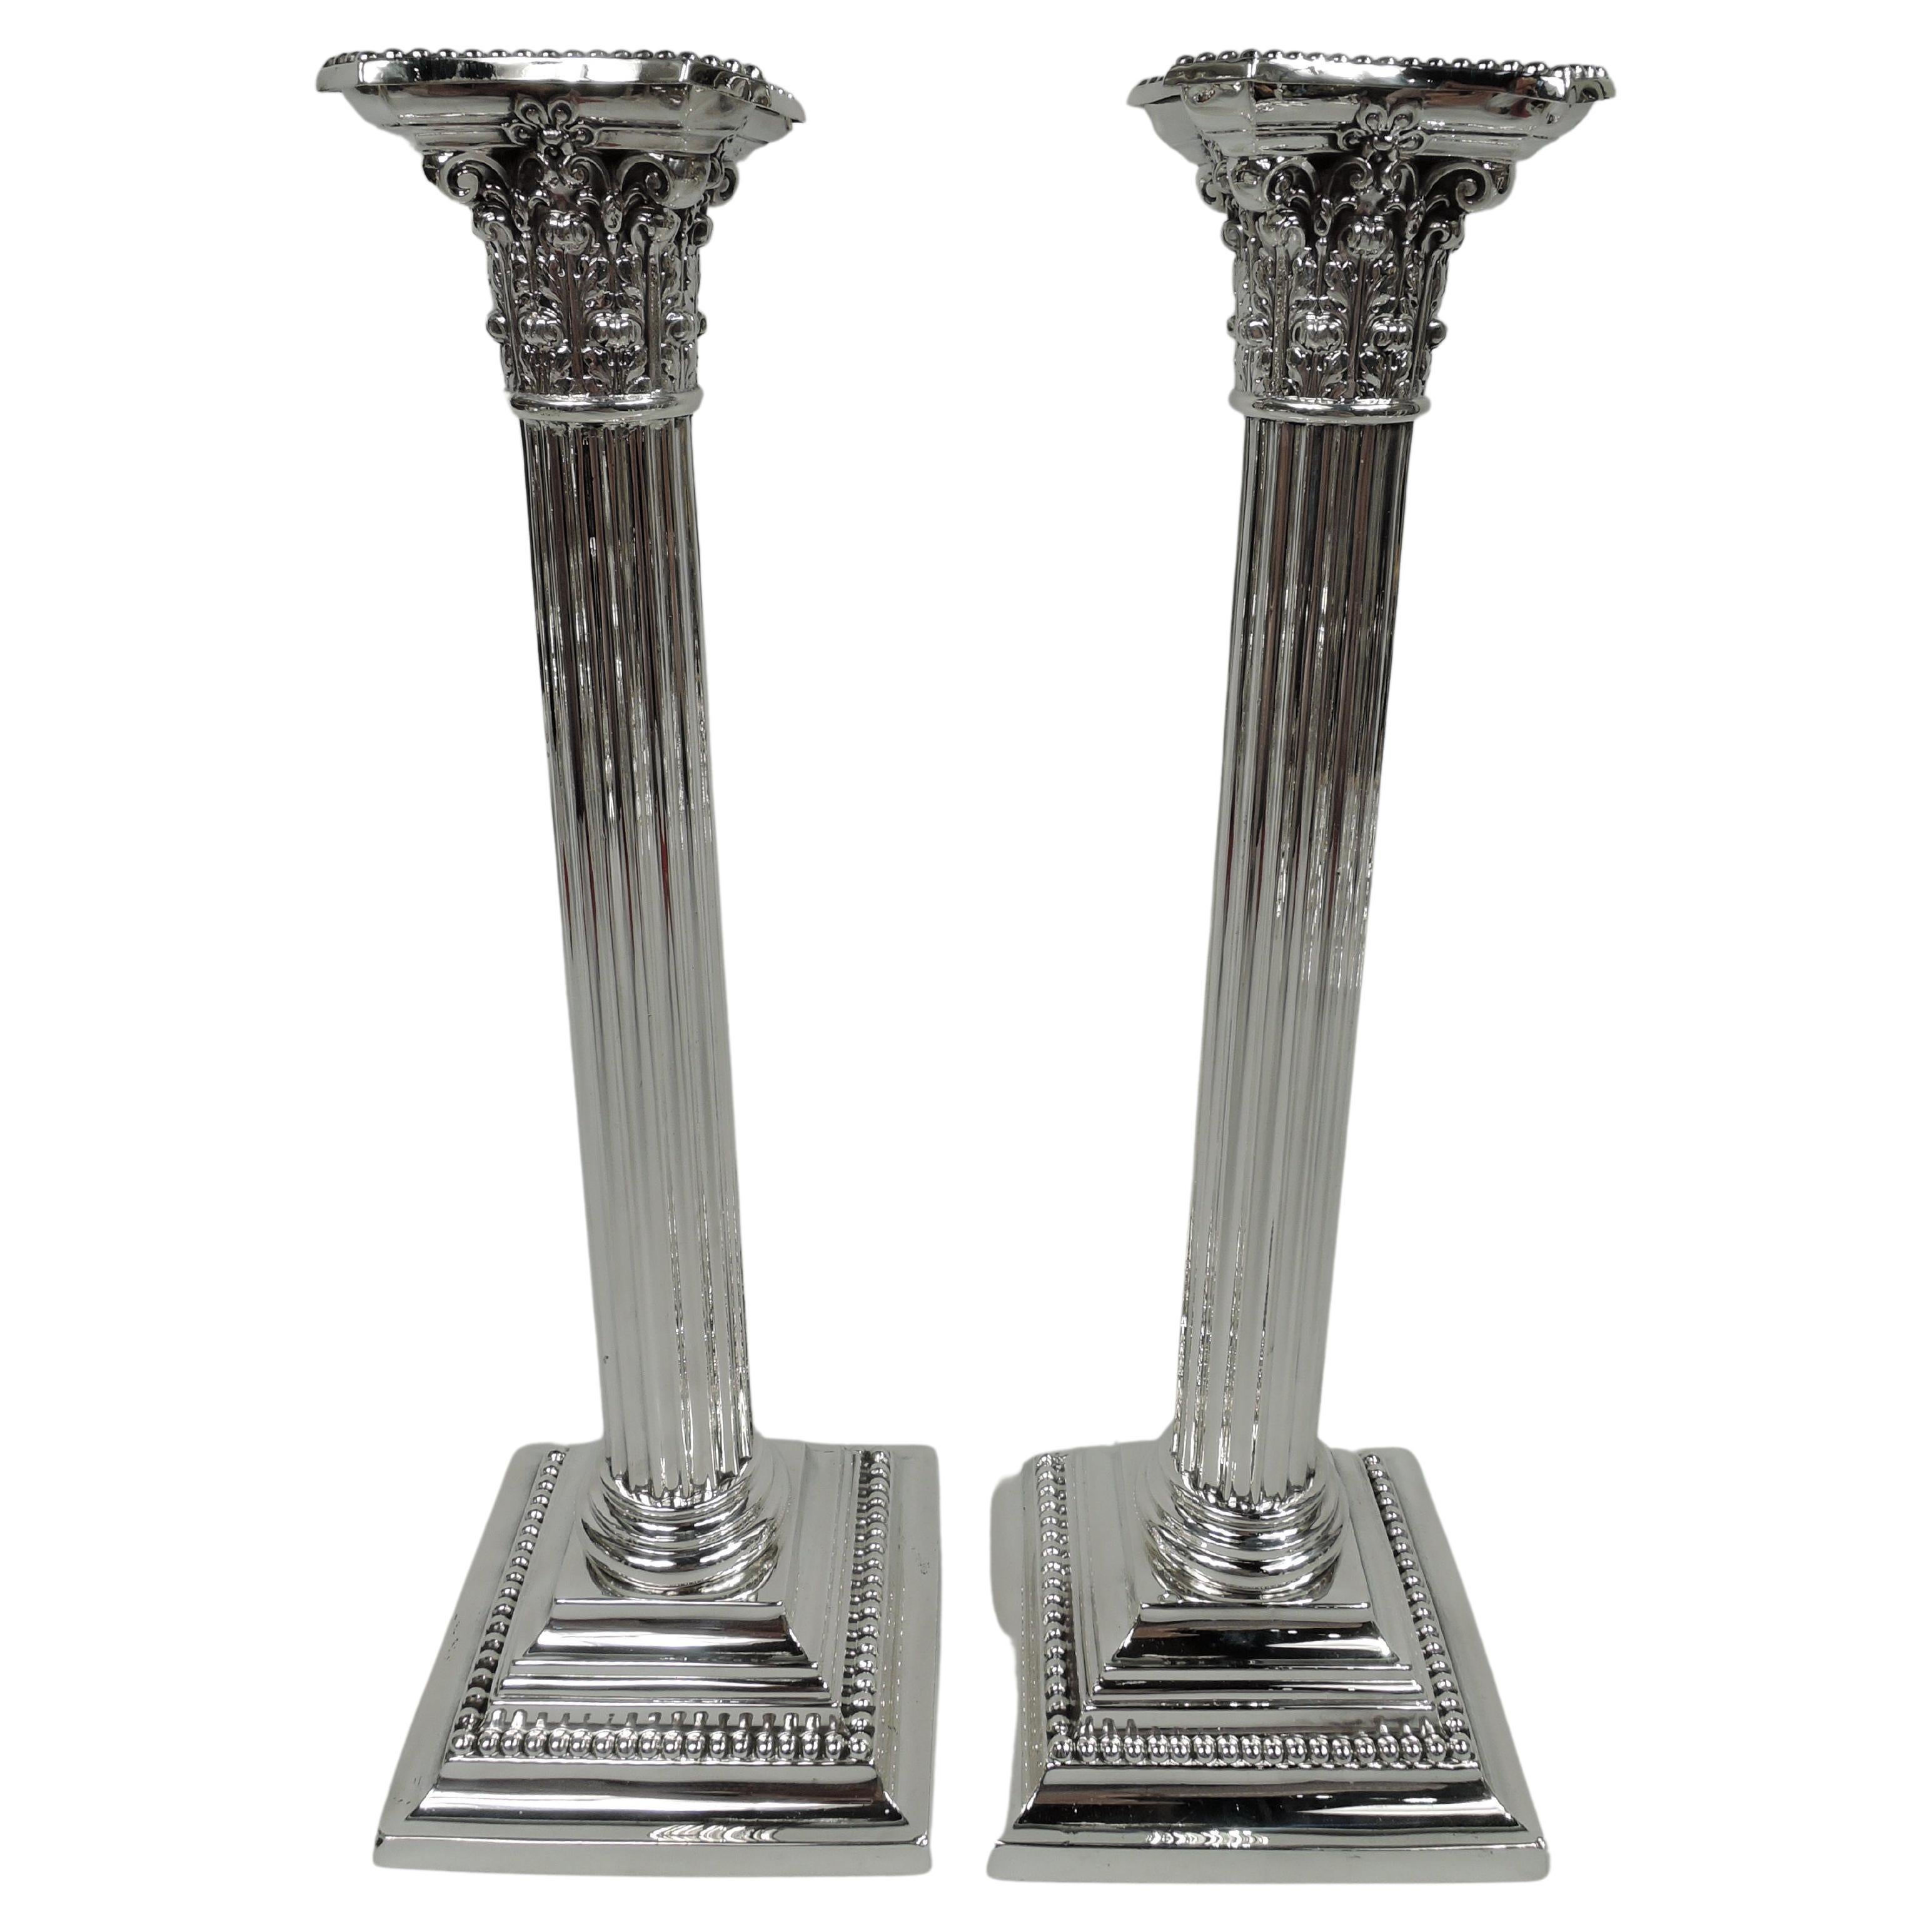 Pair of Tall Gorham Neoclassical Sterling Silver Column Candlesticks